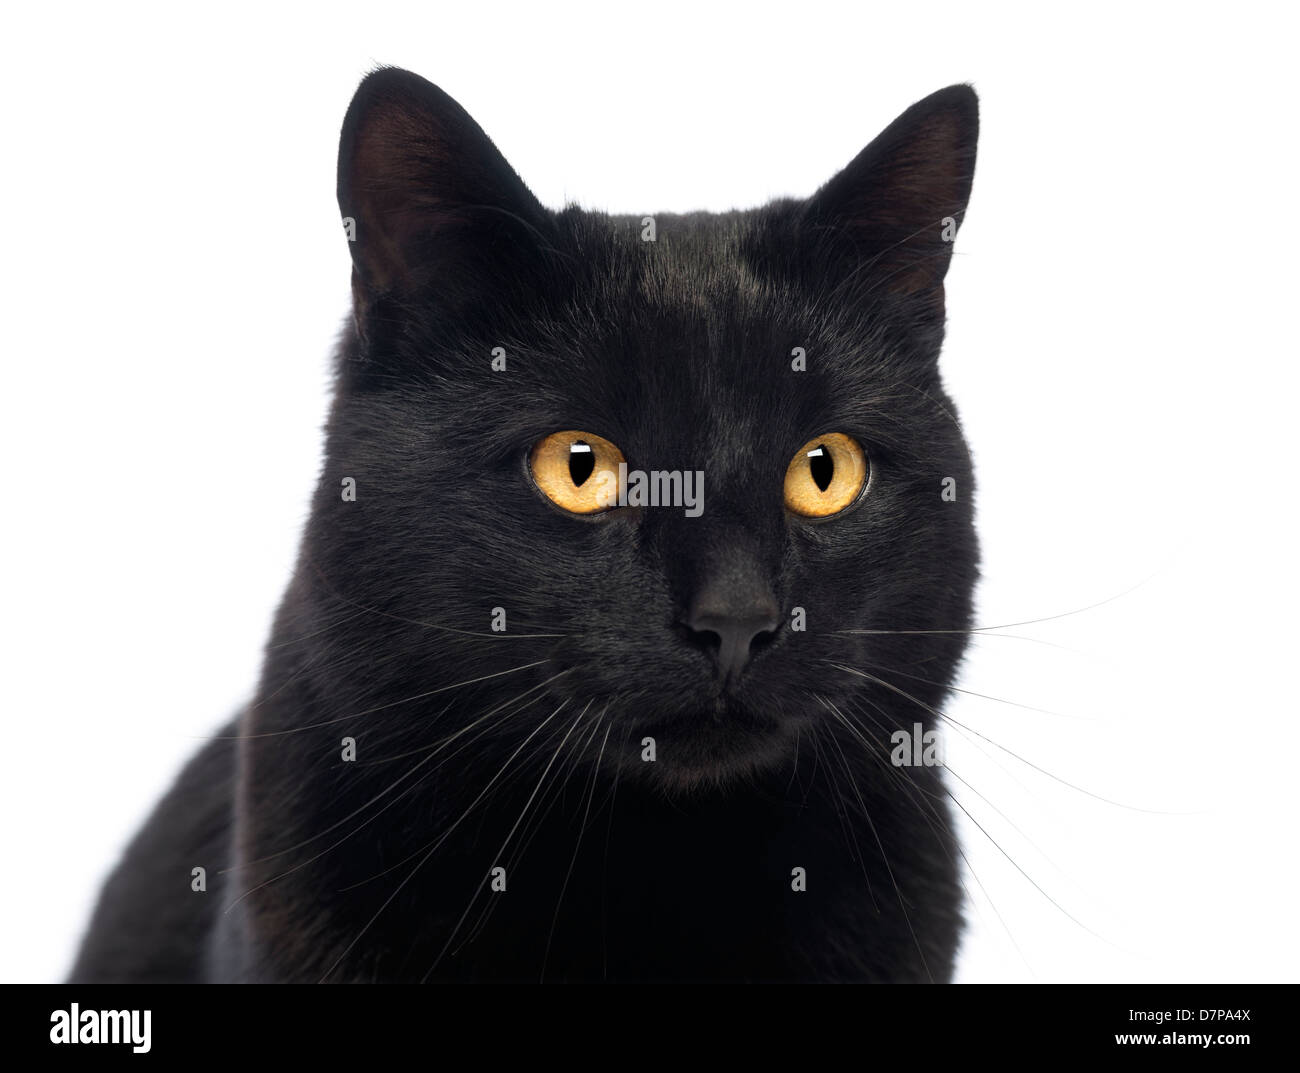 Close-up of a Black Cat against white background Banque D'Images